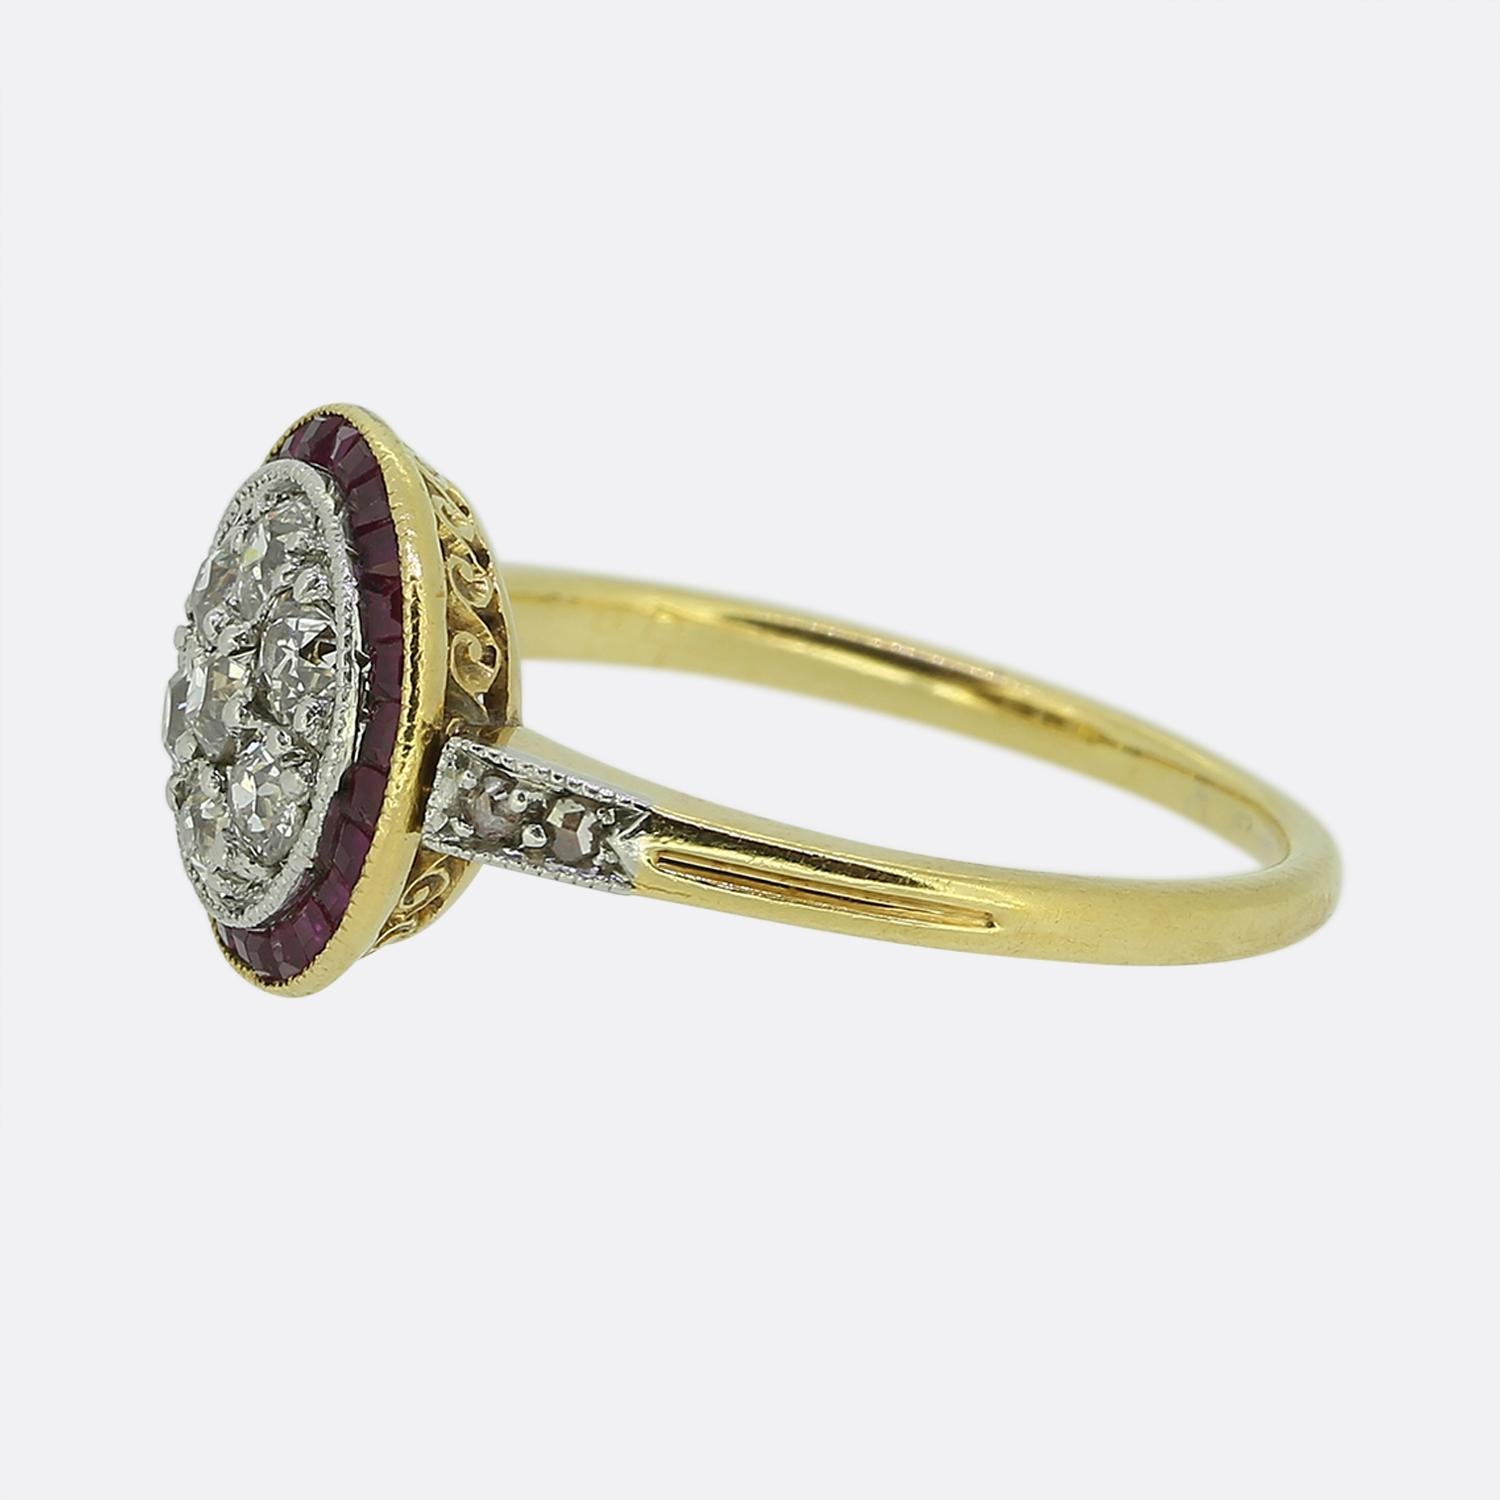 Here we have a lovely ruby and diamond target ring crafted at a time when the Art Deco style was at the height of design. A cluster of round faceted old cut diamonds have been individually claw set at the centre of the face in a fine milgrain